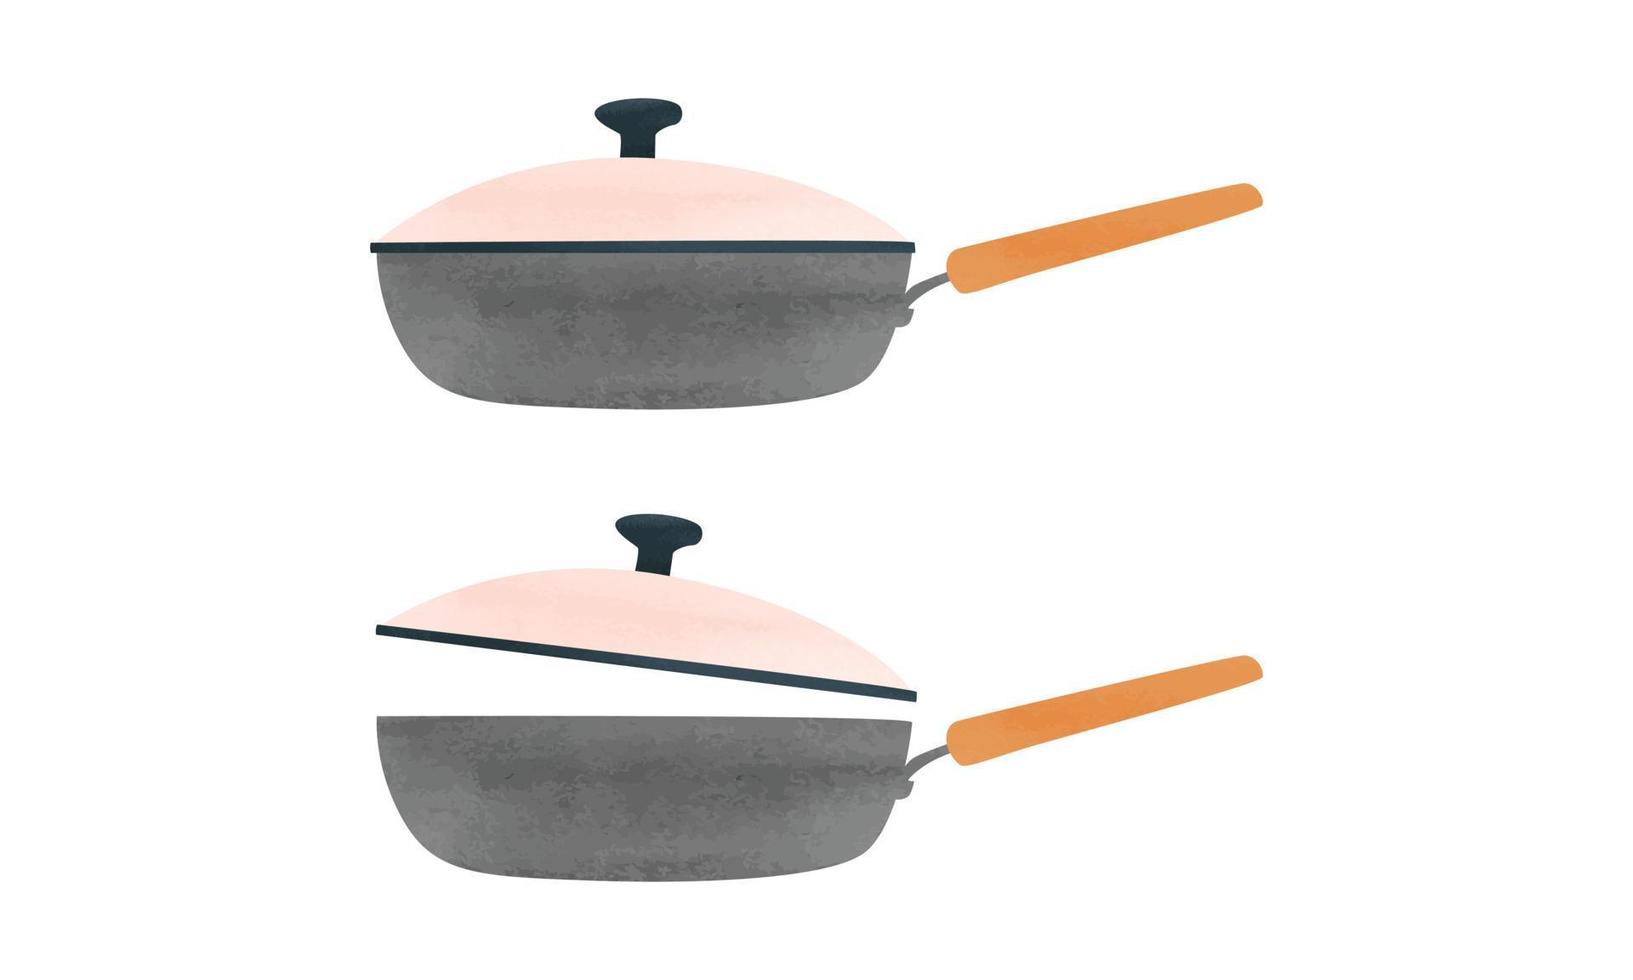 Simple kitchen deep frying pan watercolor style vector illustration isolated on white background. Deep frying pan with lid clipart. Kitchen utensils cartoon hand drawn clipart. Vector design